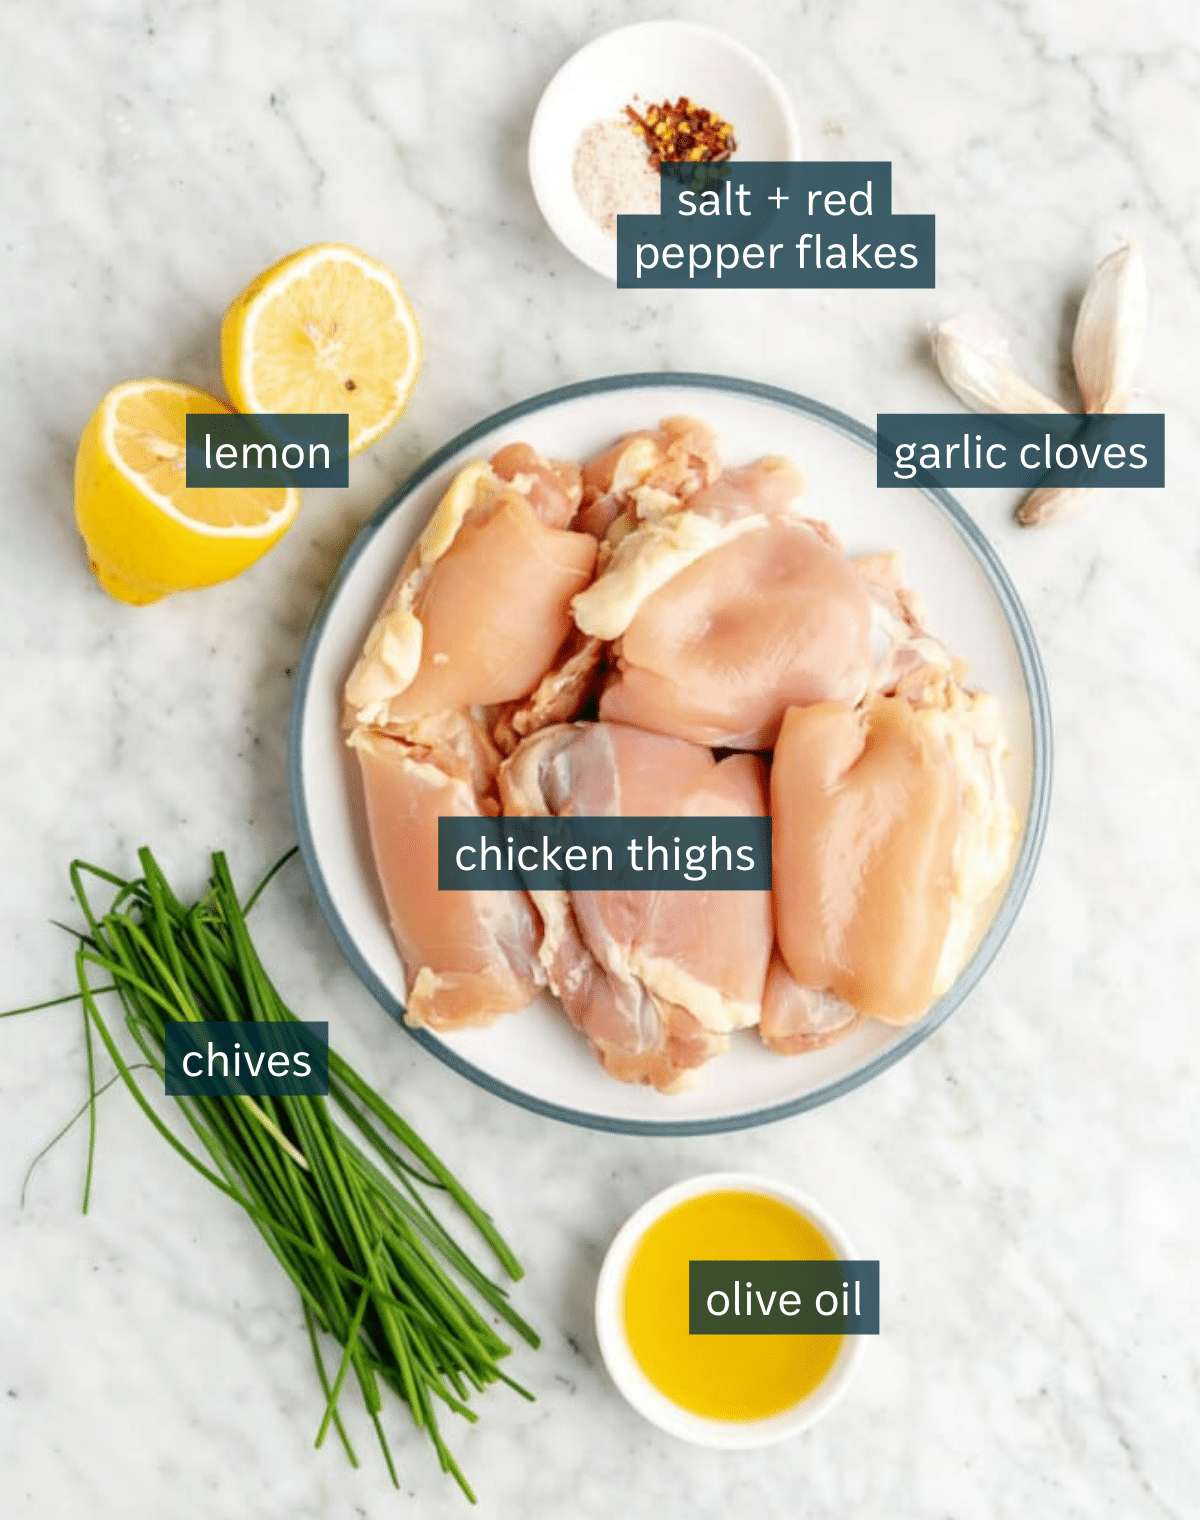 Ingredients for lemon garlic chicken thighs sit in a variety of bowls on a marble surface.